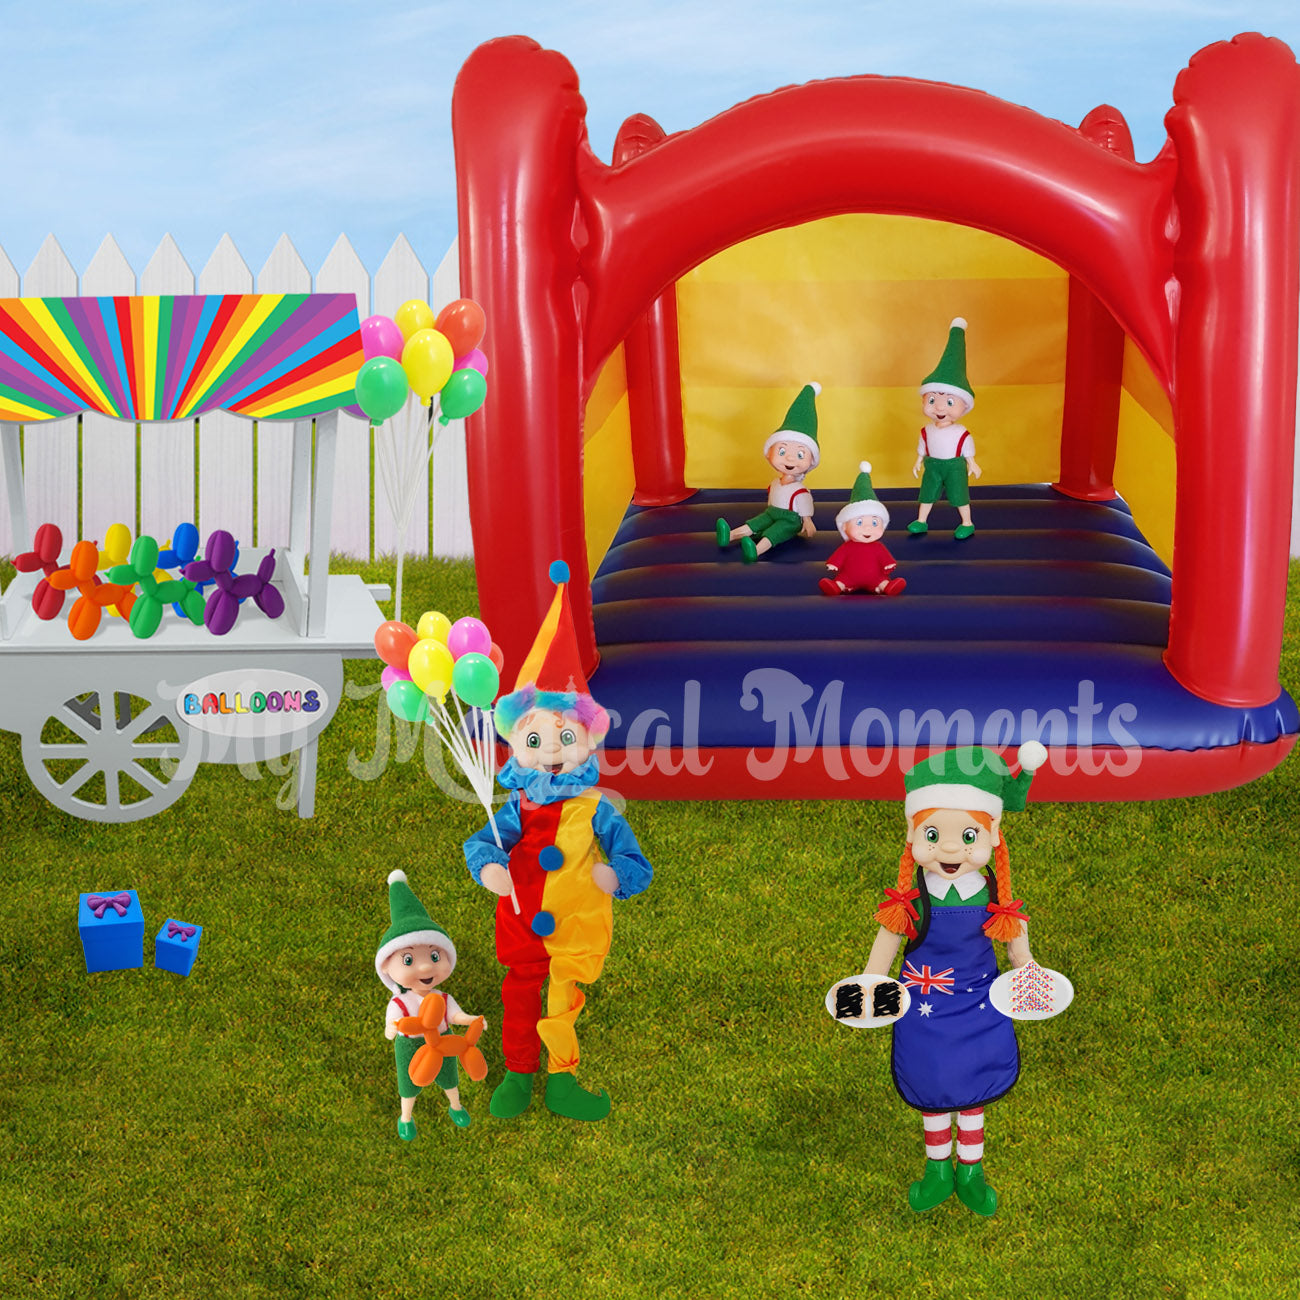 Elves having a birthday party. With a miniature inflatable jumping castle, party food, balloons and an elf wearing a clown costume